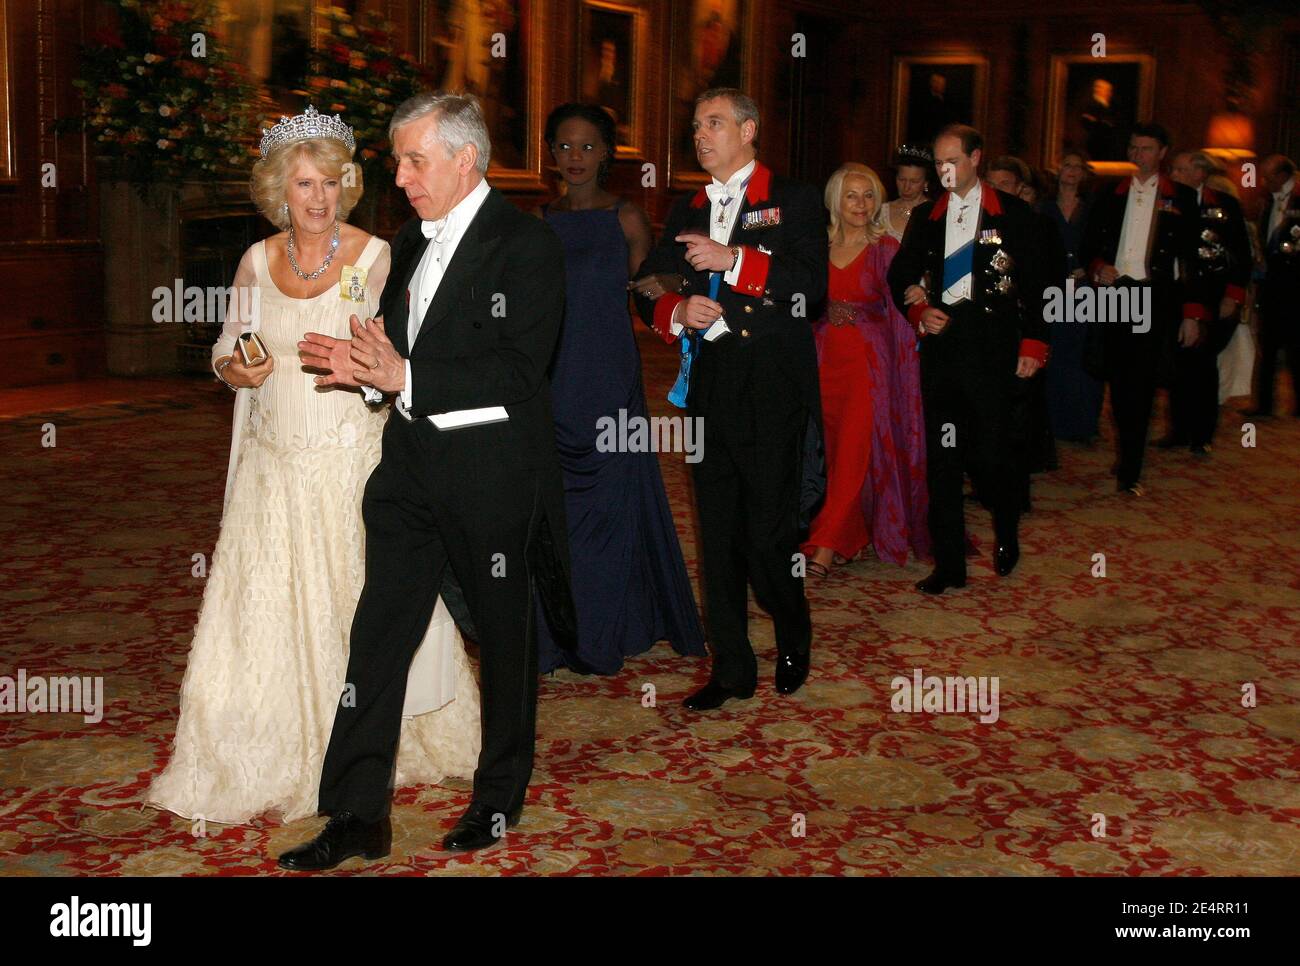 Duchess of Cornwall, French Junior Minister Rama Yade, Prince Edward the  Earl of Wessex, Princess Margaret and French Foreign Minister Bernard  Kouchner arrive at the state banquet at Windsor Castel, in Windsor,